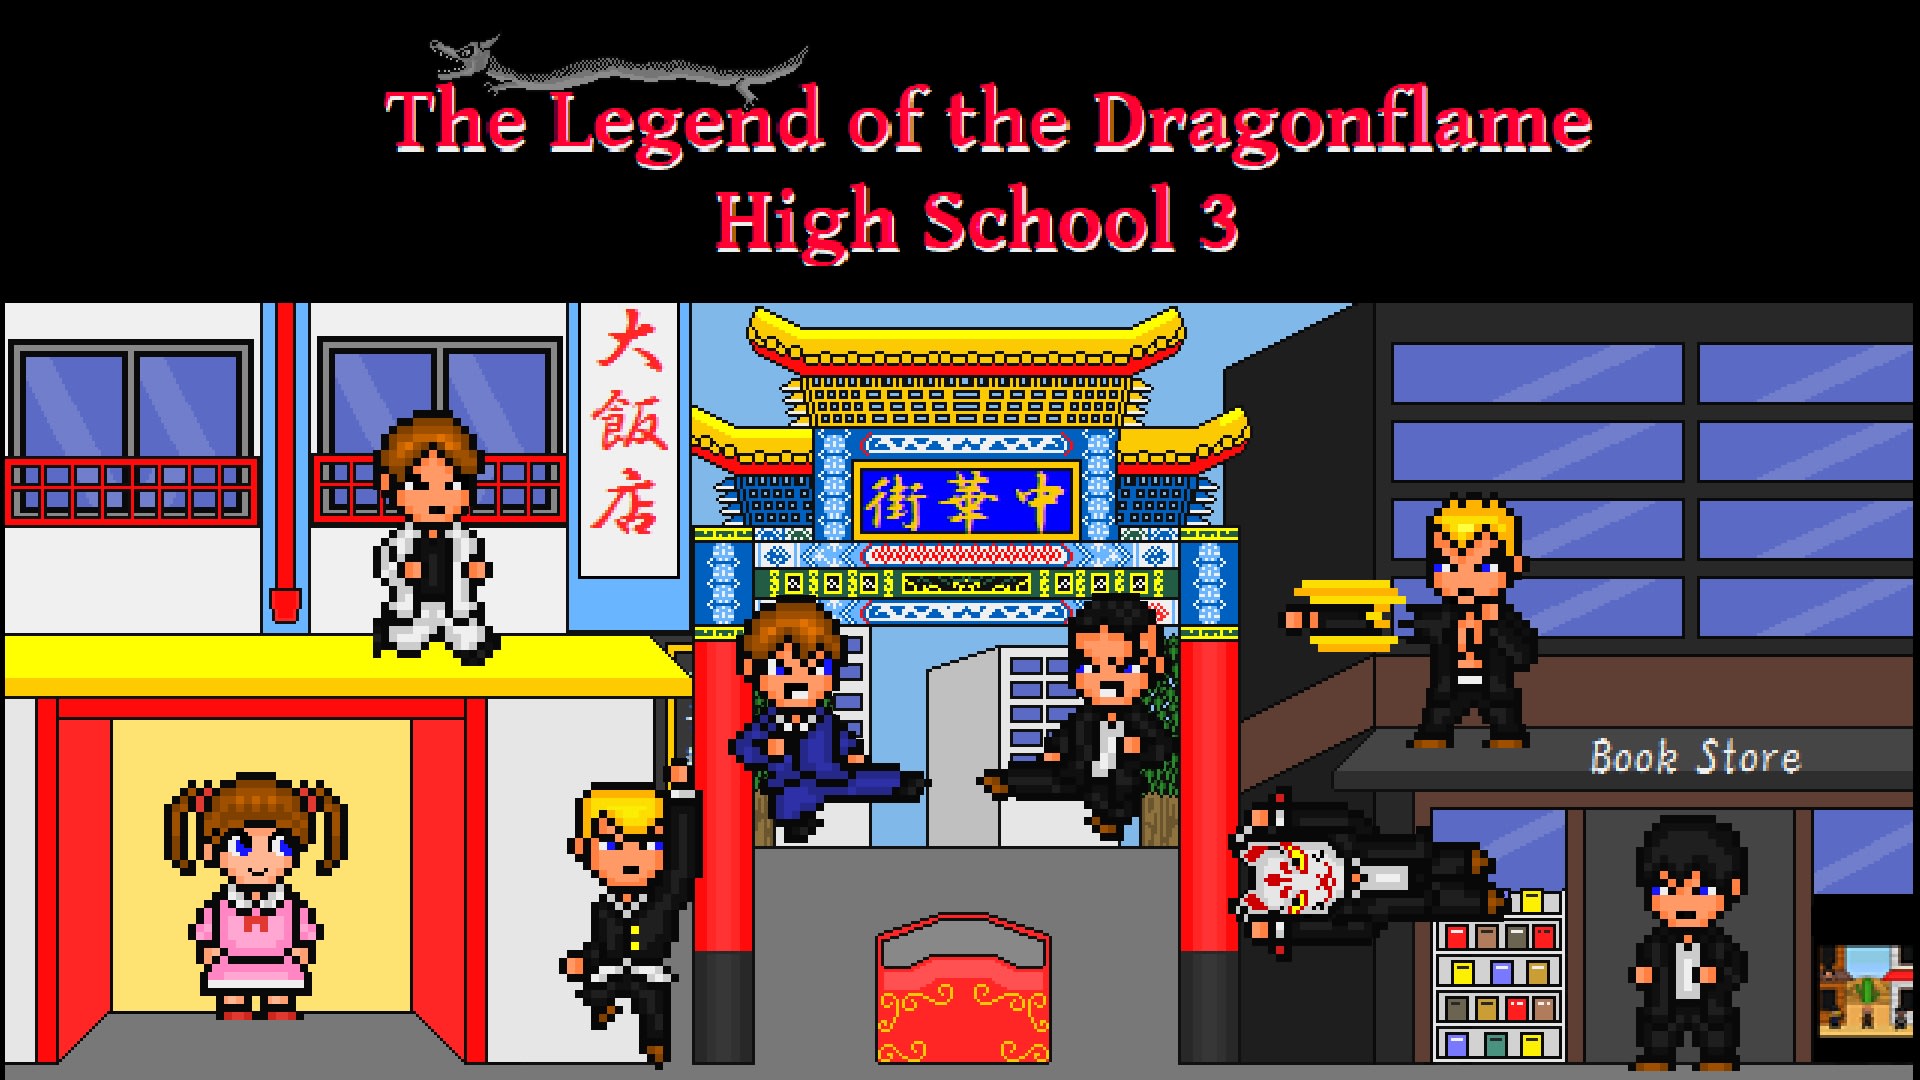 The Legend of the Dragonflame High School 3